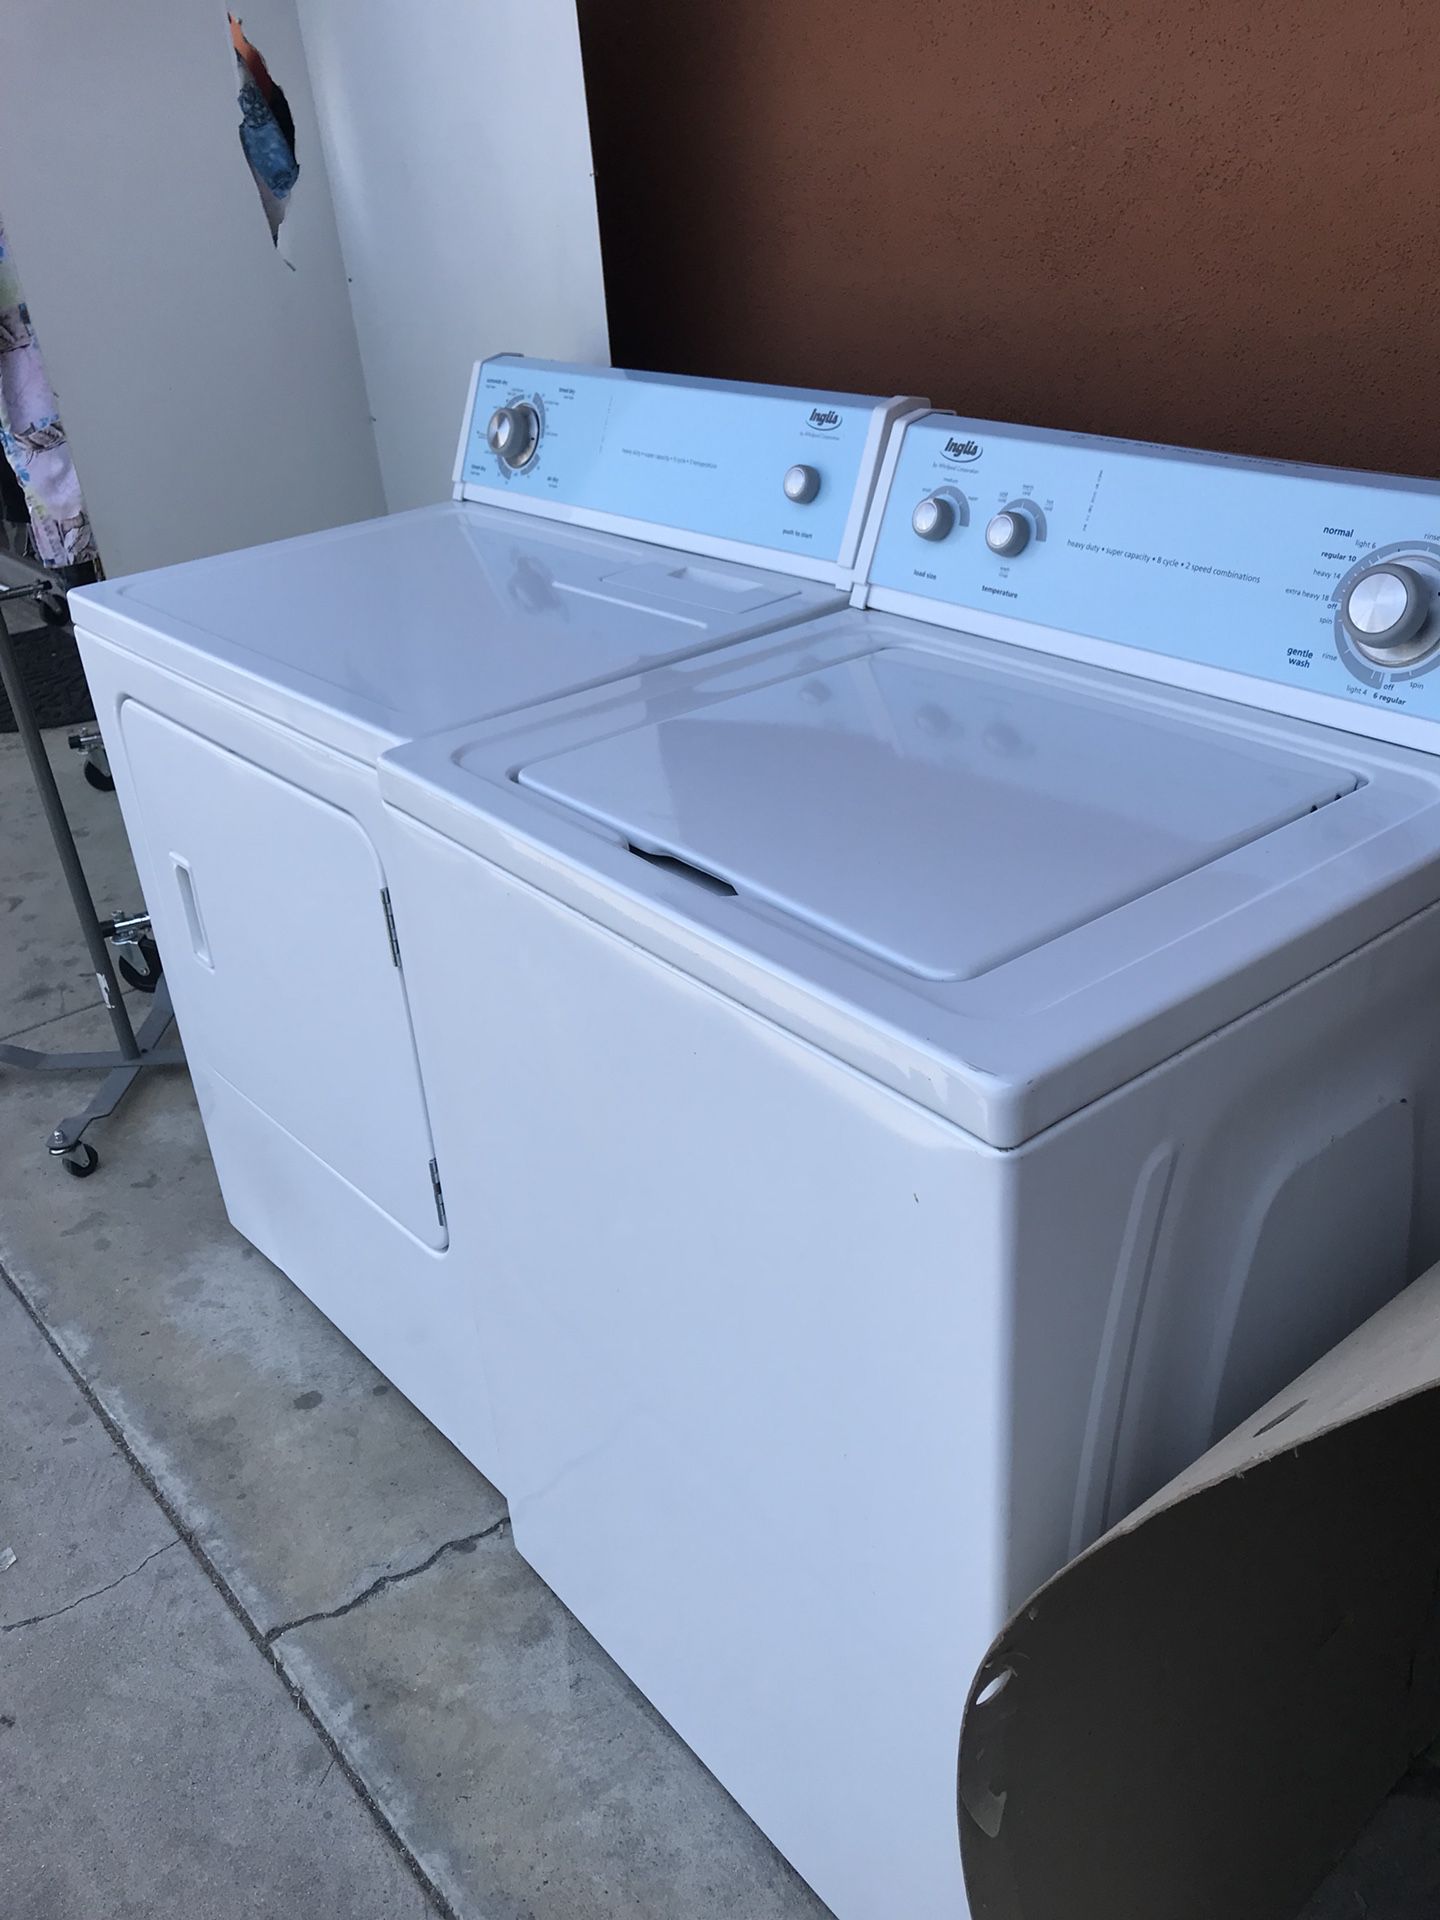 Inglis washer and electric dryer